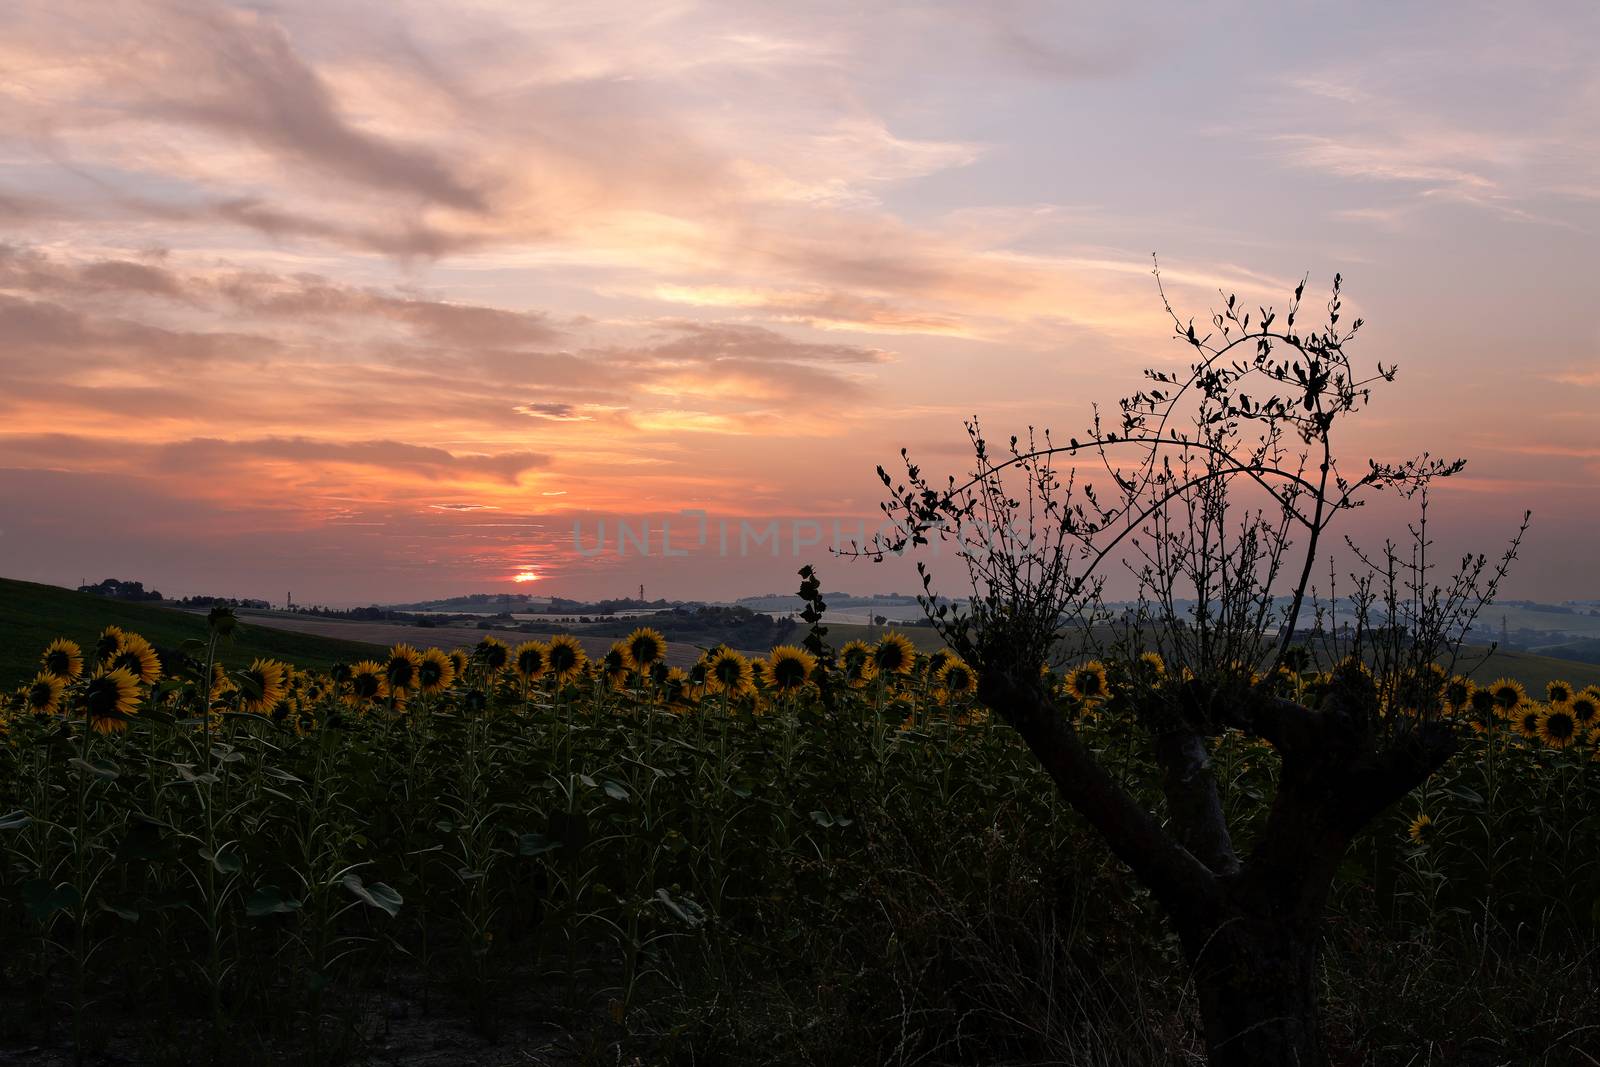 Sunrise in front of a field of sunflowers